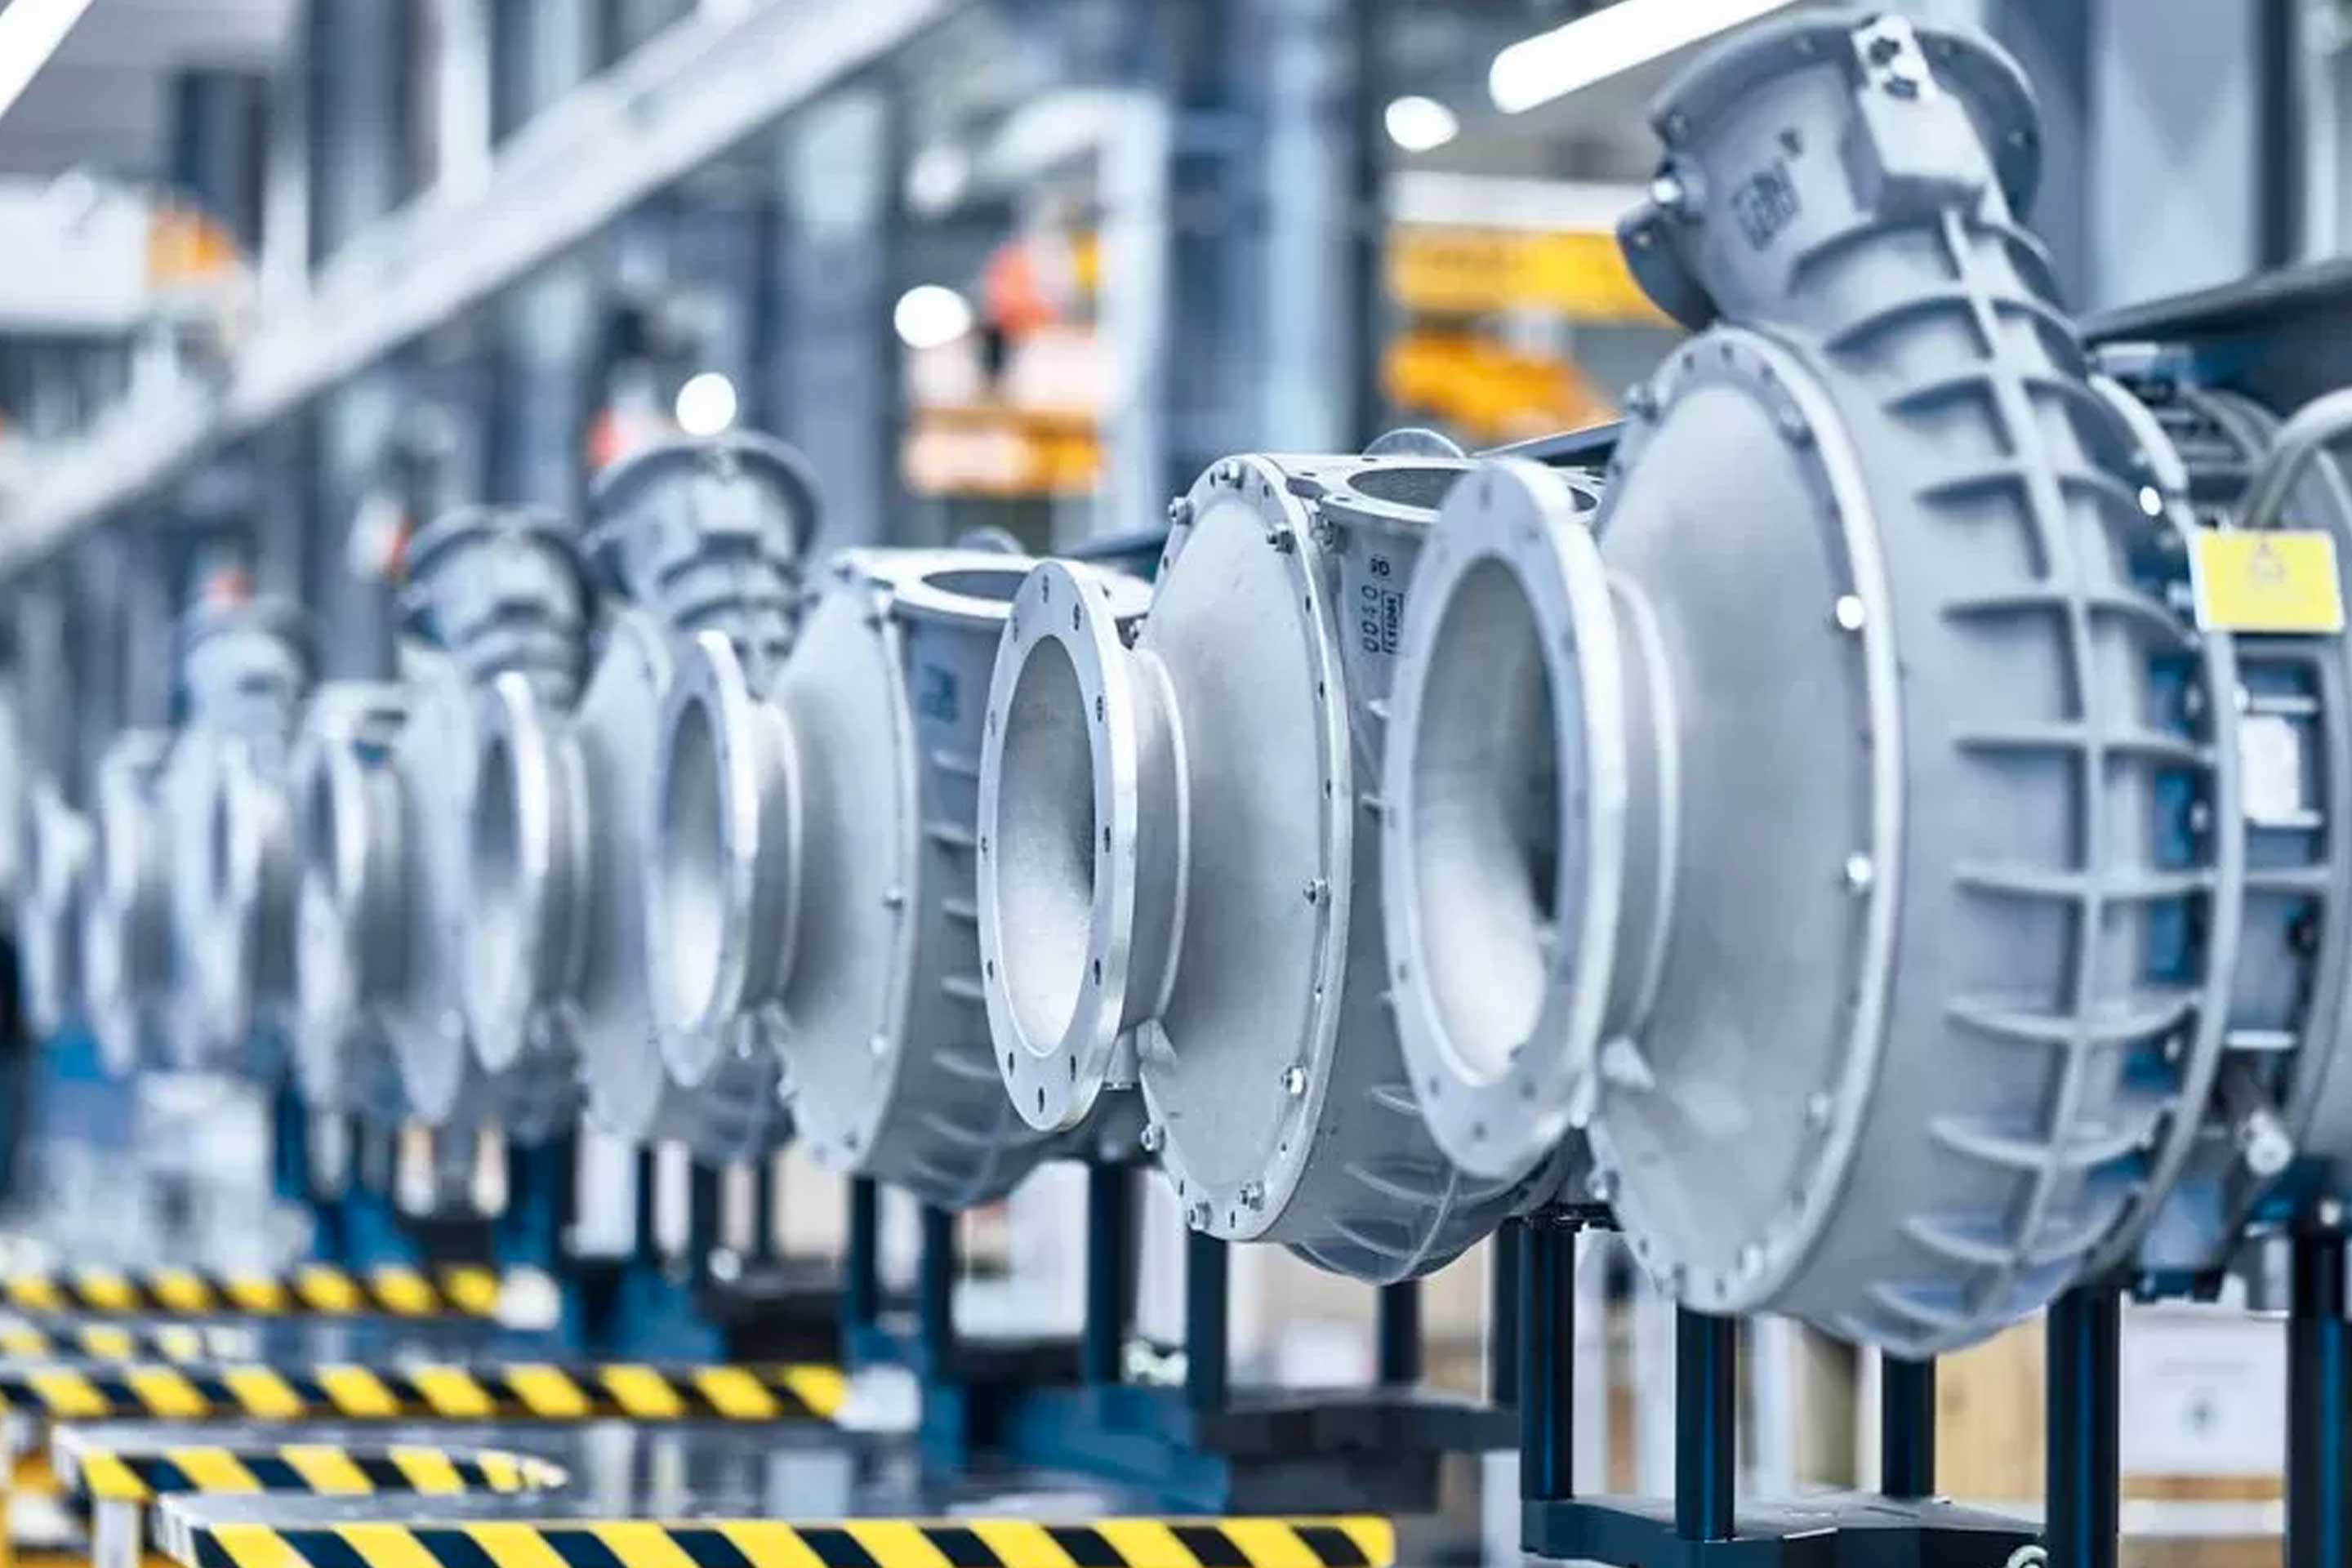 A production line of turbochargers